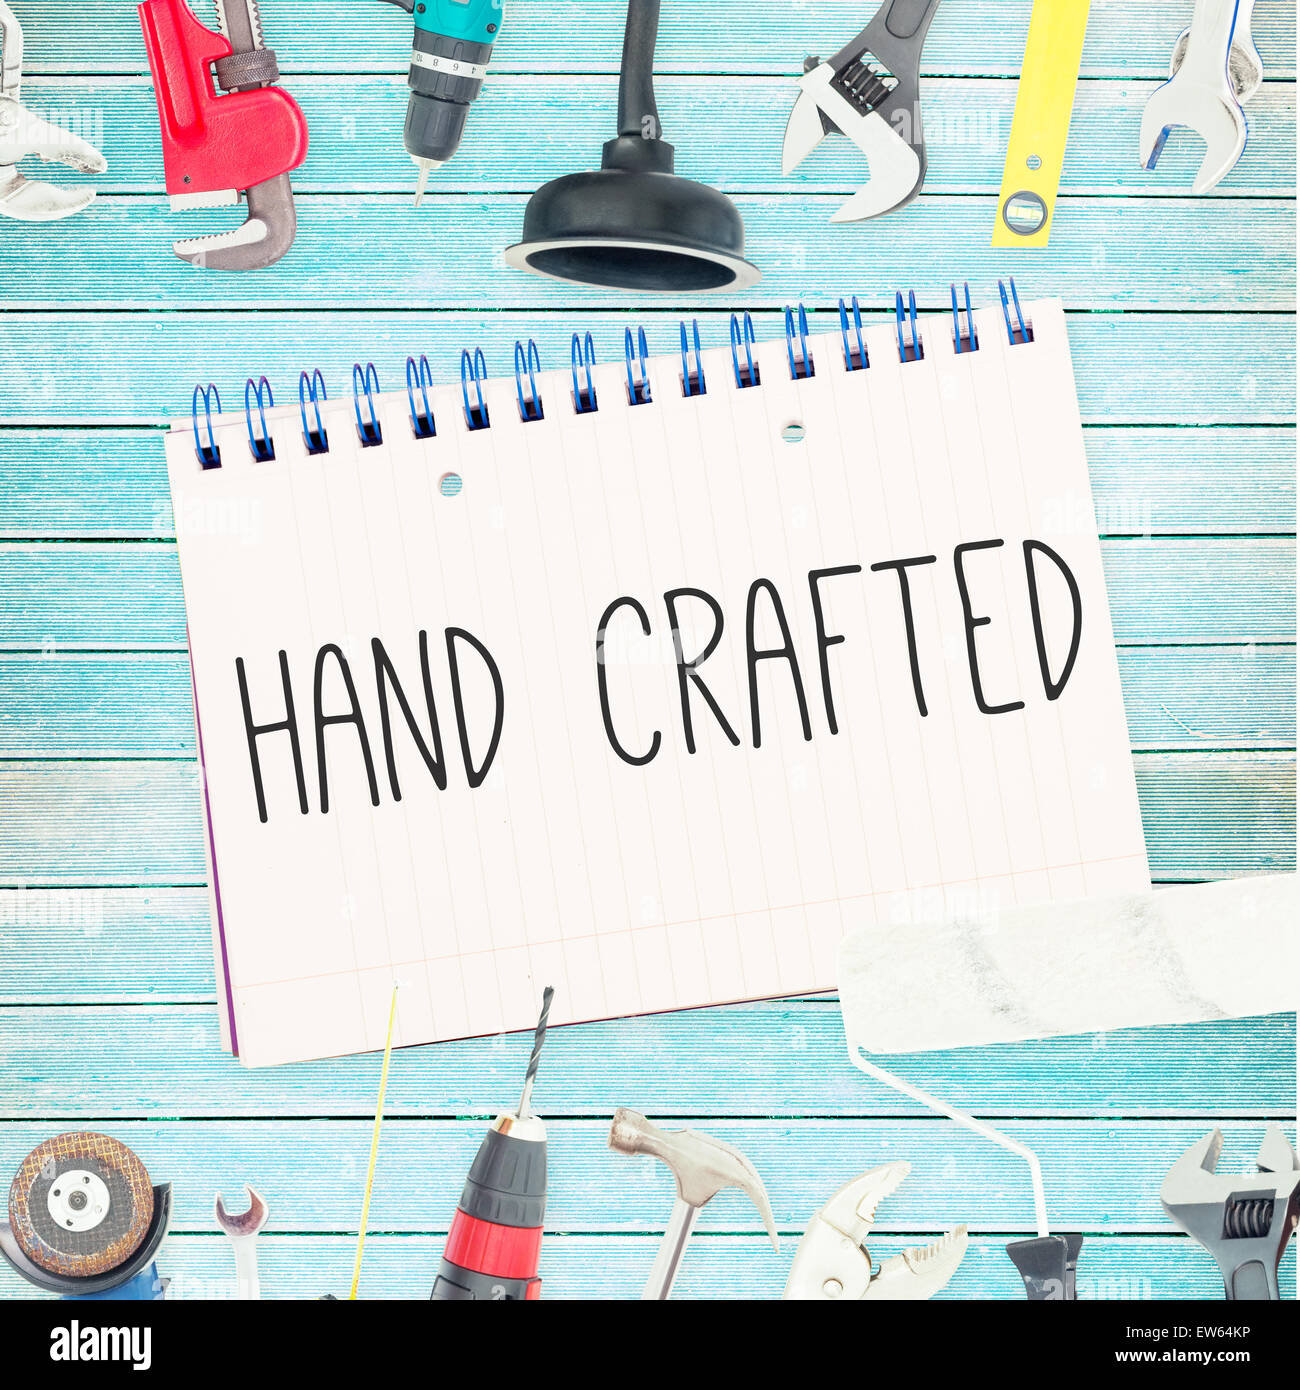 Hand crafted against tools and notepad on wooden background Stock Photo